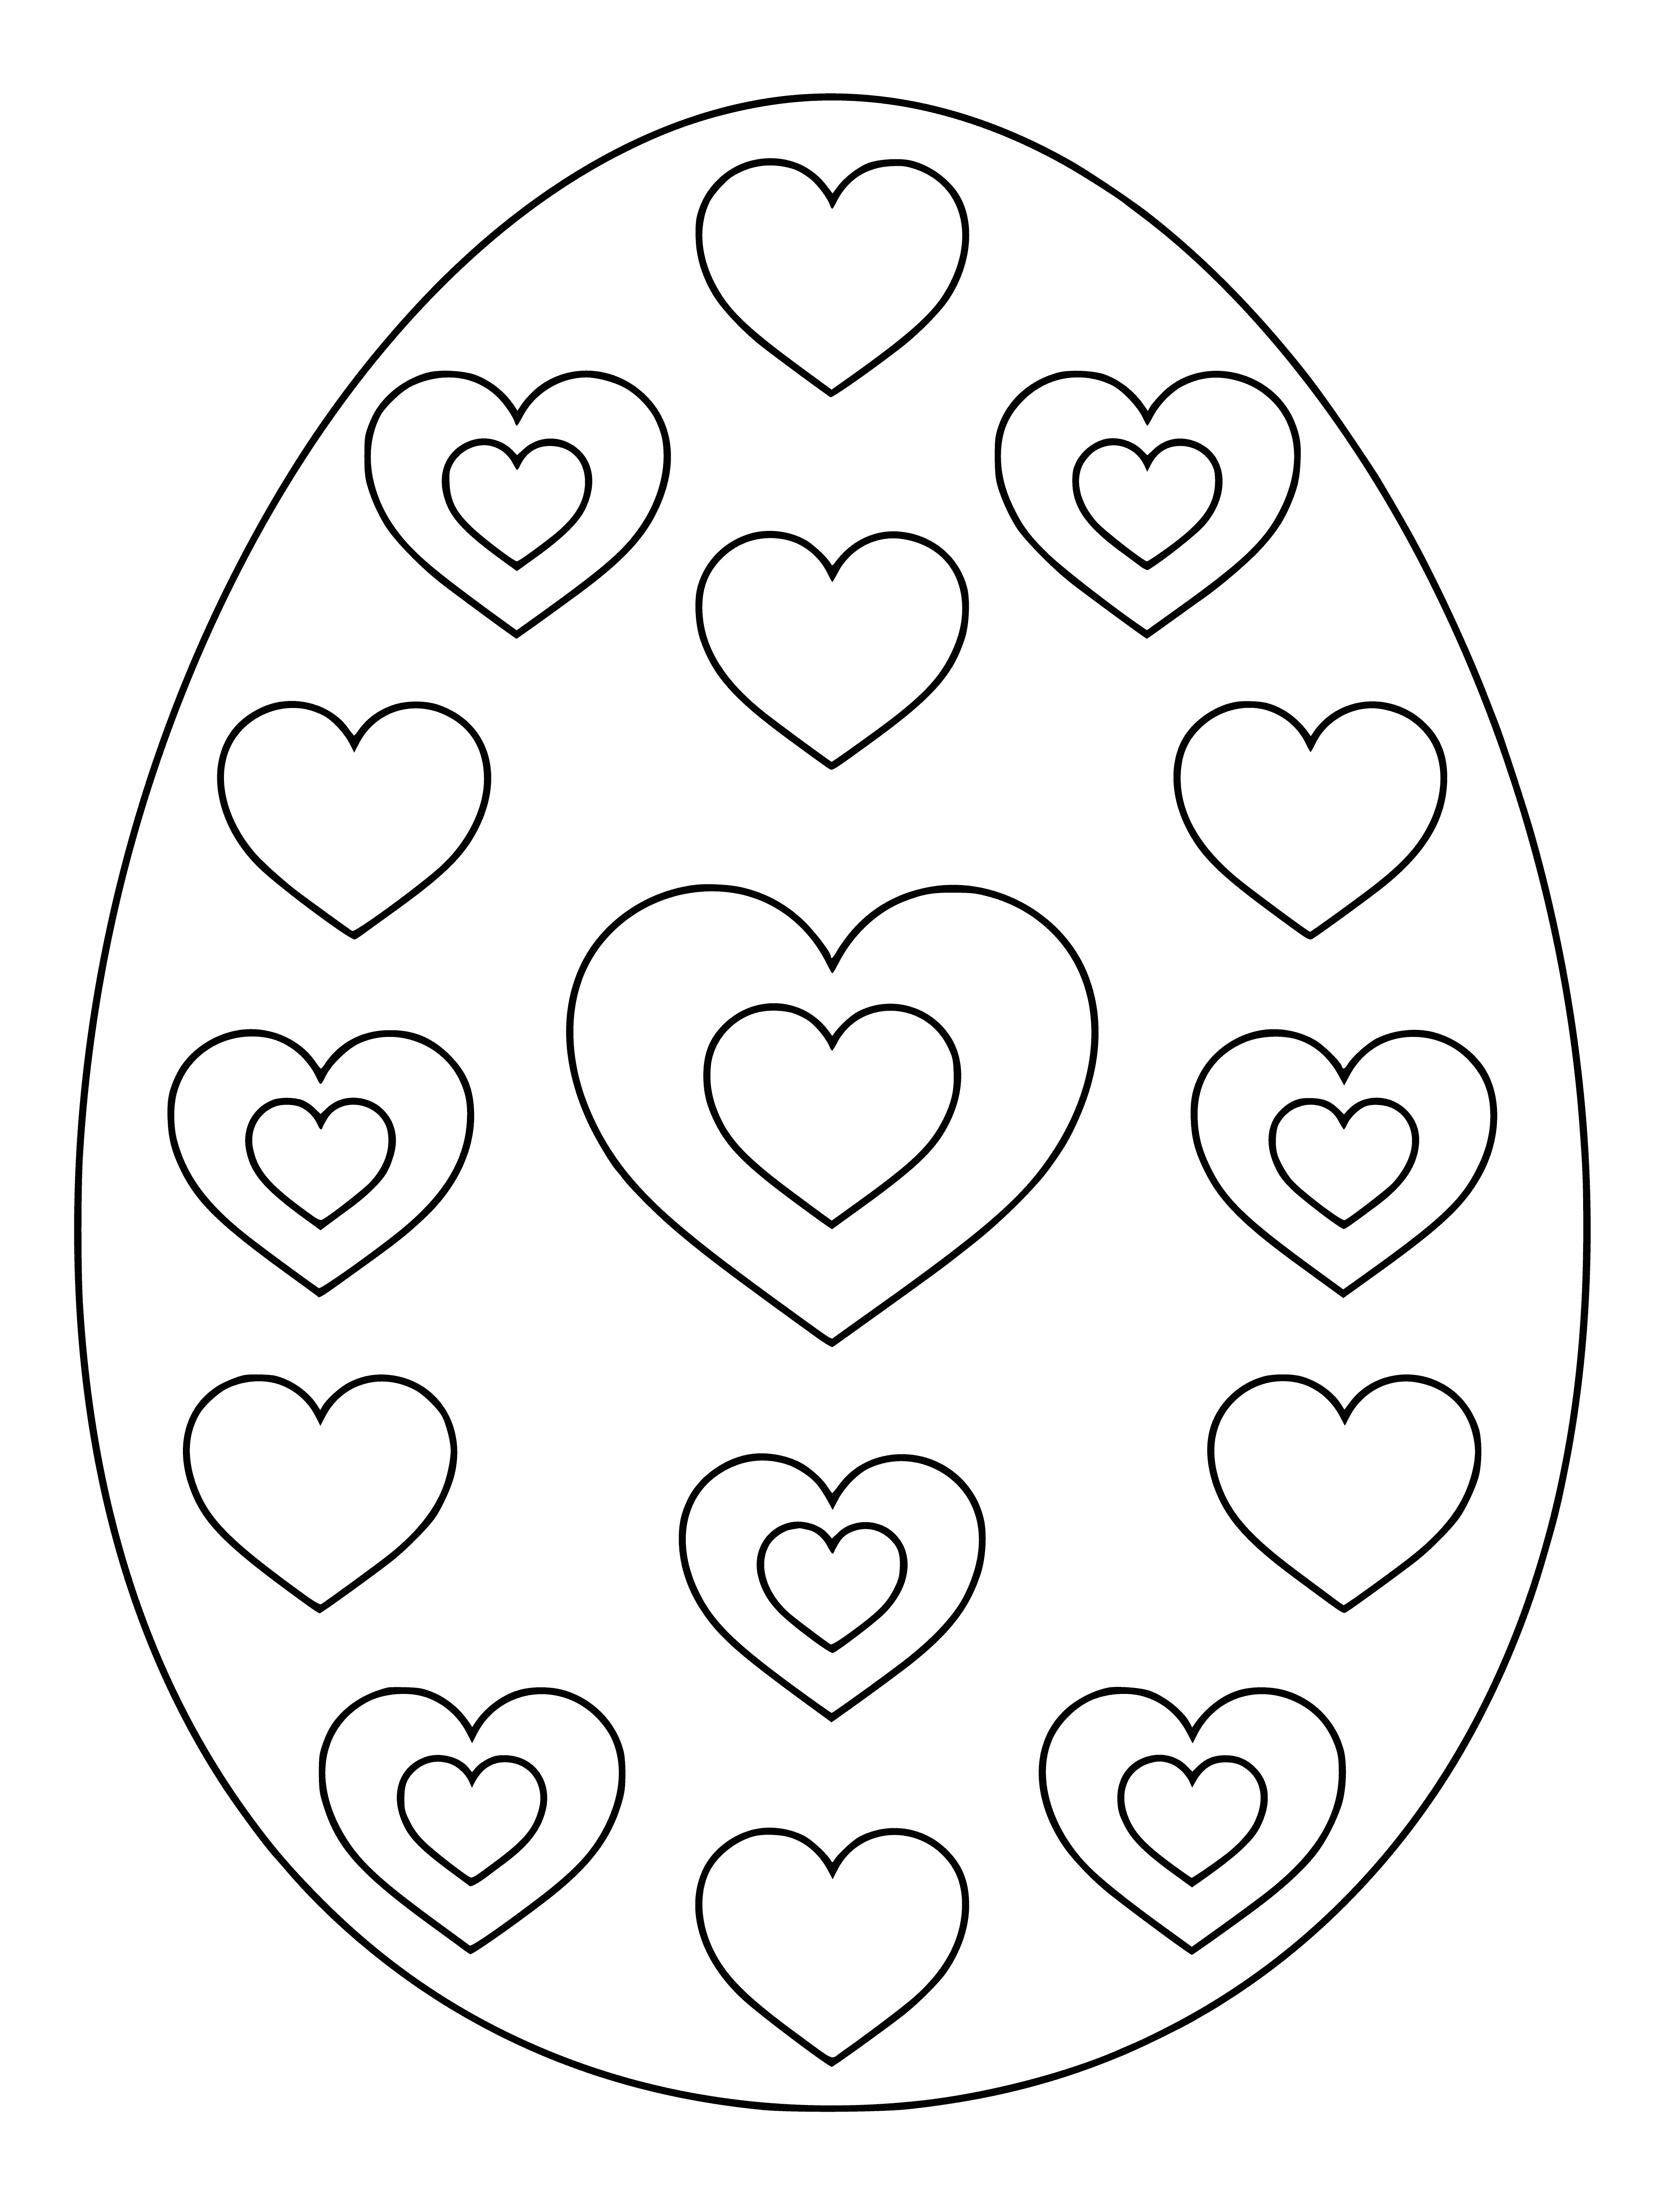 coloring page: #EasterEggColoring